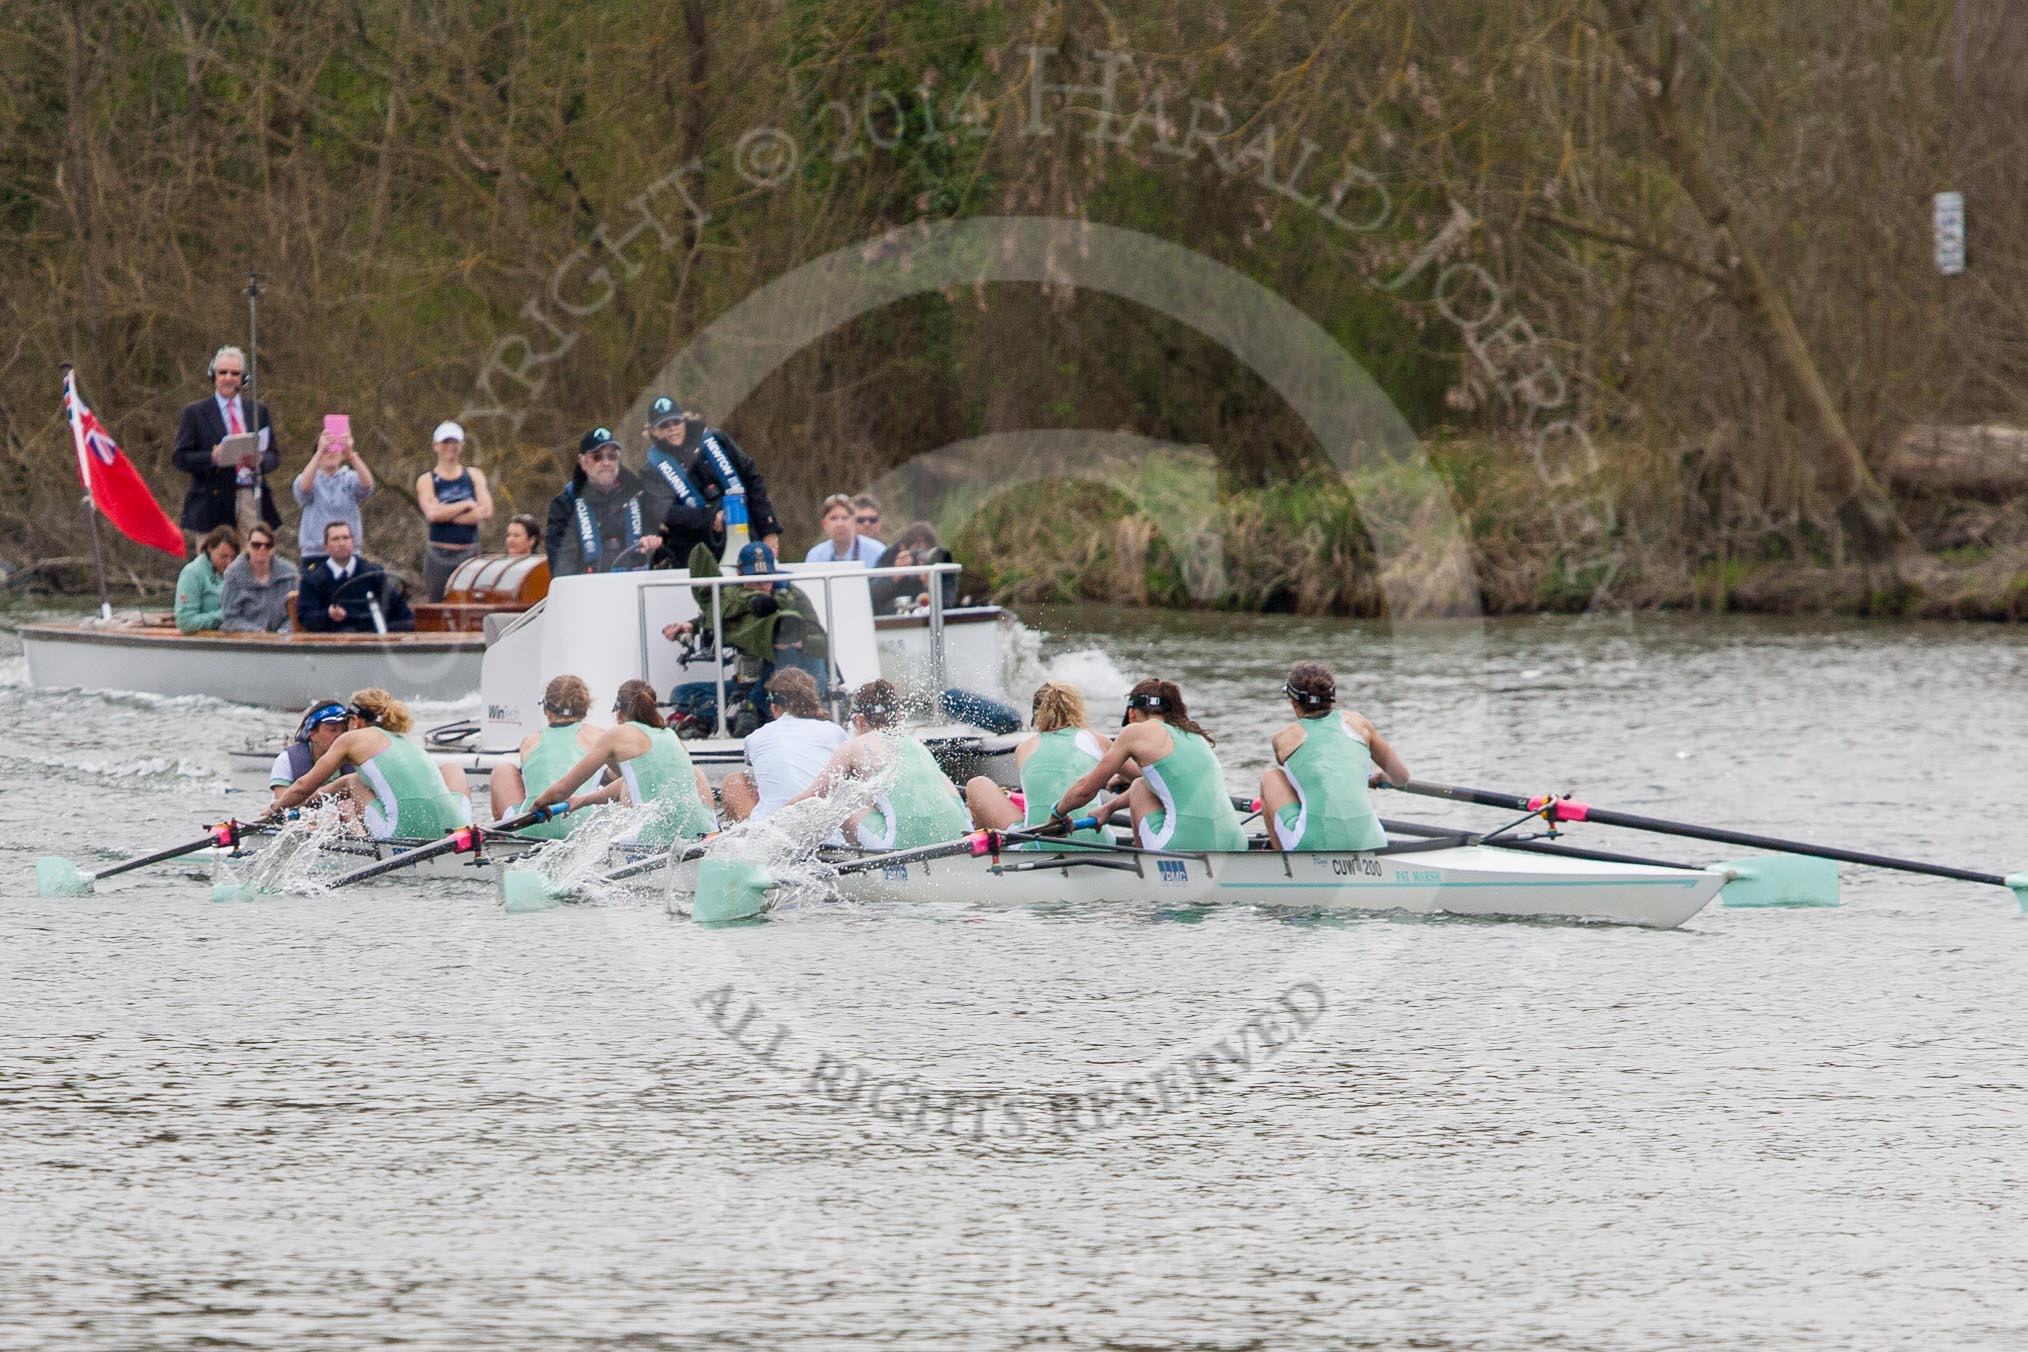 The Women's Boat Race and Henley Boat Races 2014: The umpire's launch, with a TV cameraman in front, and the press launch, with race commentator Robert Treharne Jones staning, are following the Lightweight Women's Boat Race..
River Thames,
Henley-on-Thames,
Buckinghamshire,
United Kingdom,
on 30 March 2014 at 14:49, image #227